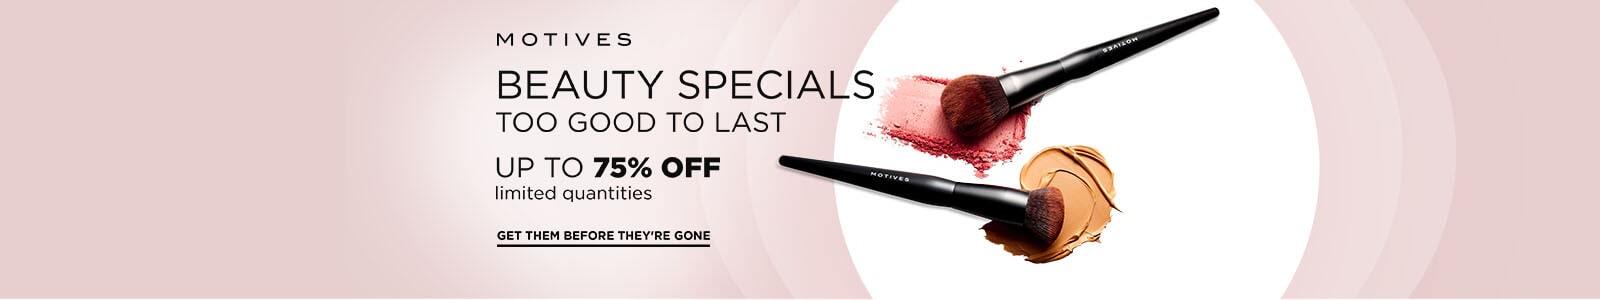 Motives beauty specials too good to last up to 75% off limited quantities Get them before they're gone